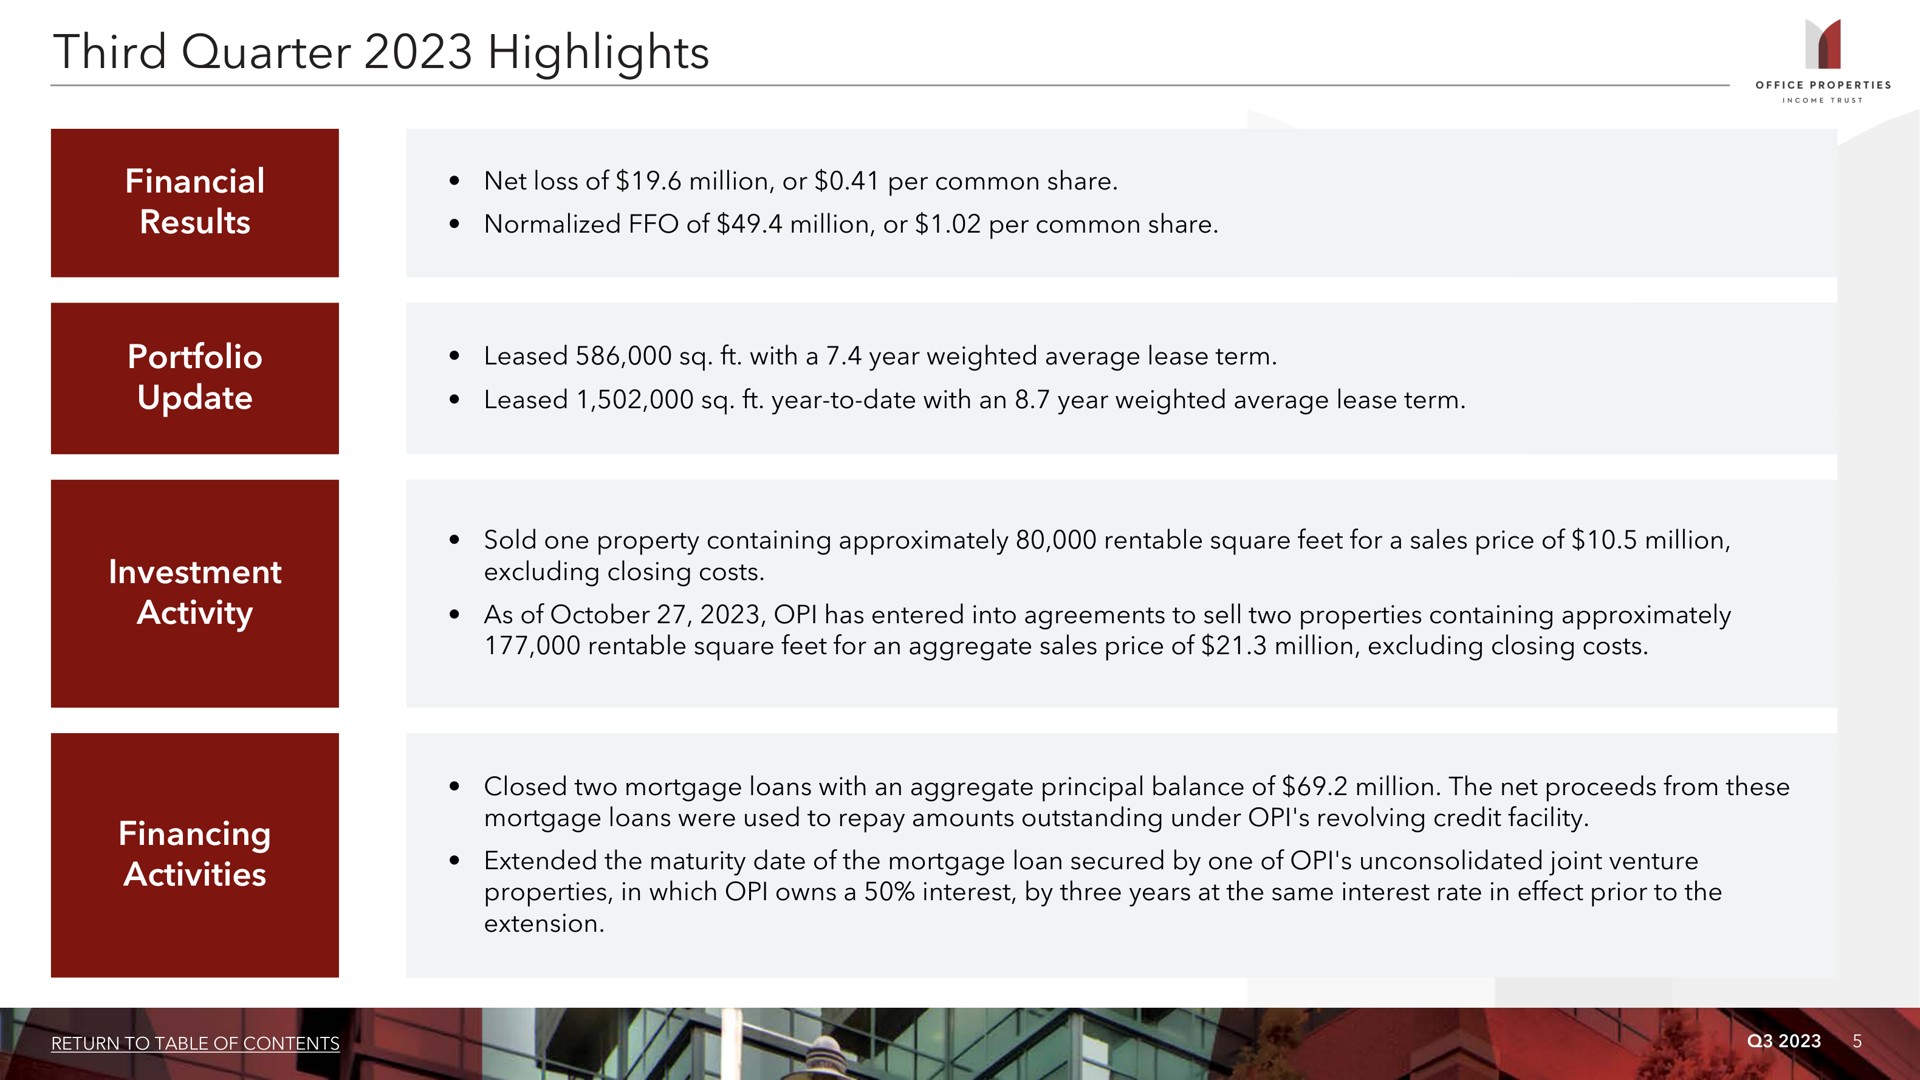 third quarter highlights financial results portfolio update investment activity financing activities i net loss of million or per common share leased year to date with an year weighted average lease term sold one property containing approximately rentable square feet for a sales price of million excluding closing costs as of has entered into agreements to sell two properties containing approximately rentable square feet for an aggregate sales price of million excluding closing costs closed two mortgage loans with an aggregate principal balance of million the net proceeds from these mortgage loans were used to repay amounts outstanding under revolving credit facility extended the maturity date of the mortgage loan secured by one of unconsolidated joint venture properties in which owns a interest by three years at the same interest rate in effect prior to the | Office Properties Income Trust